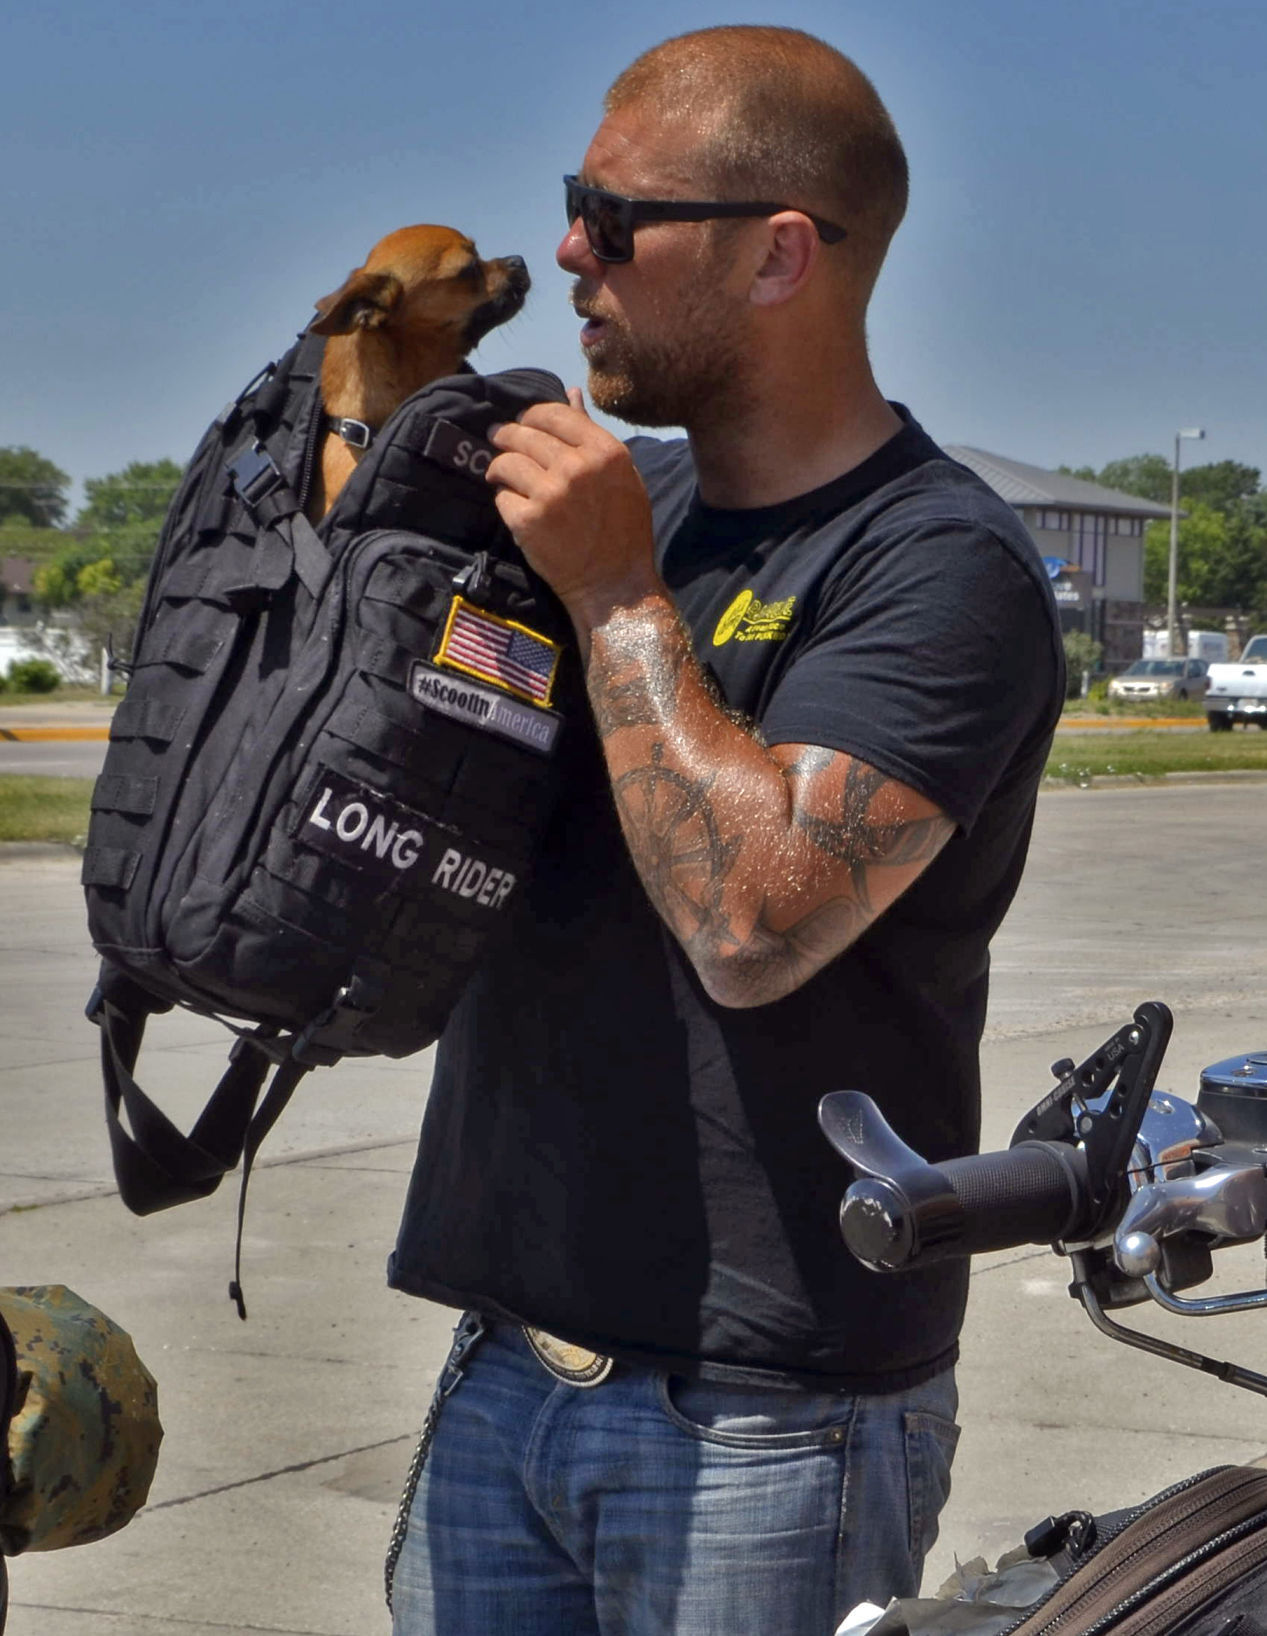 Motorcyclist rides coast-to-coast to support veterans